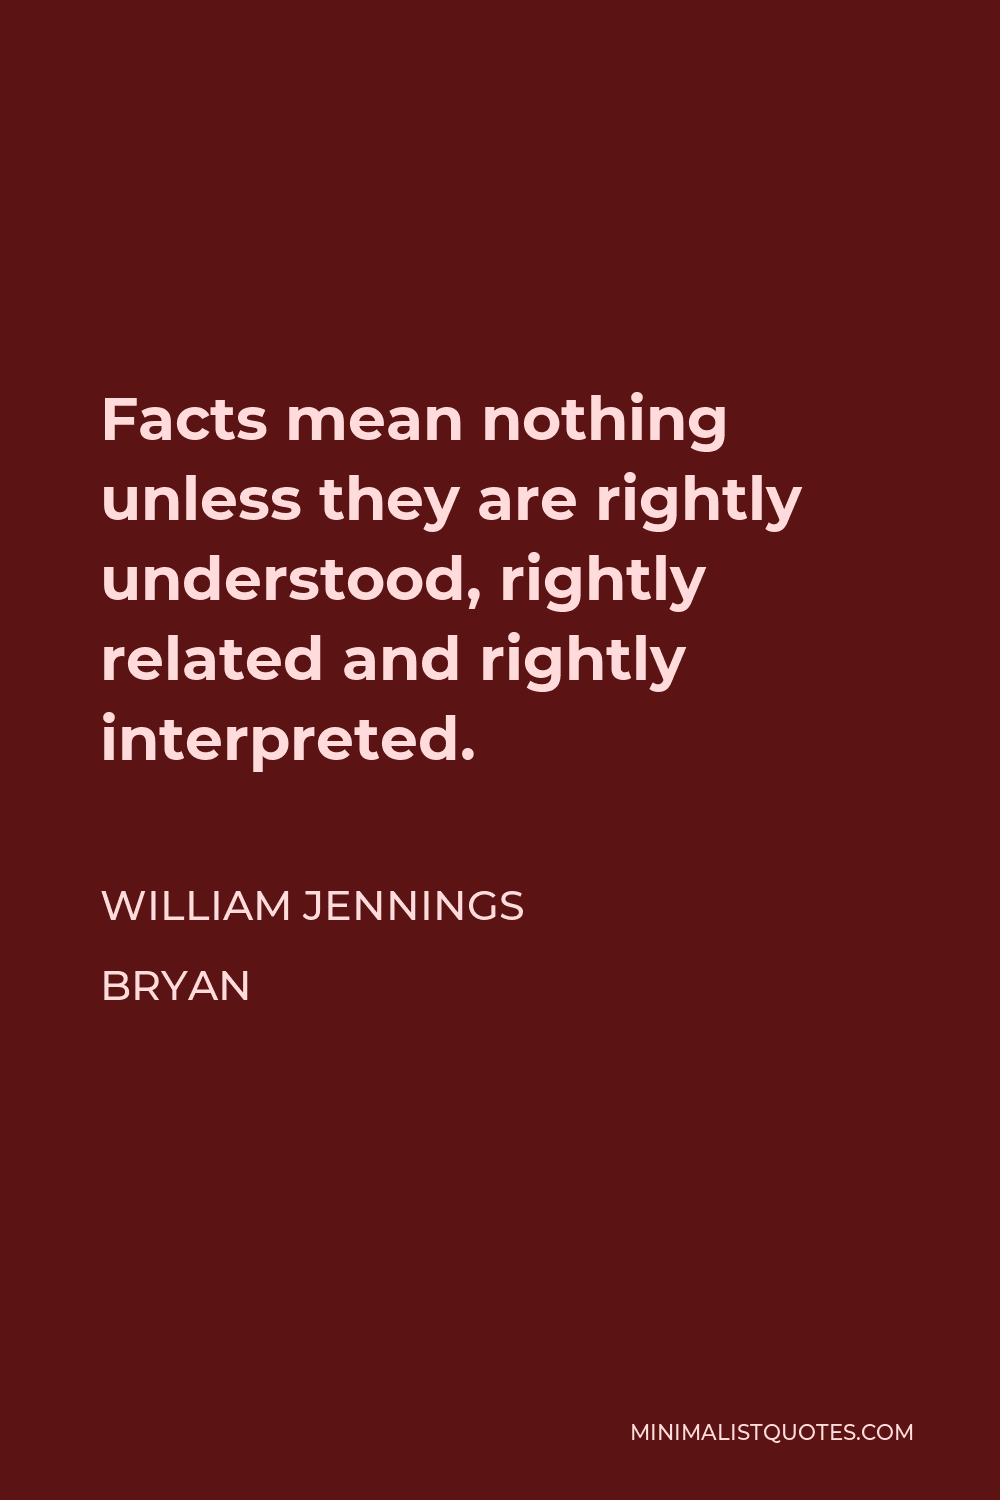 William Jennings Bryan Quote - Facts mean nothing unless they are rightly understood, rightly related and rightly interpreted.